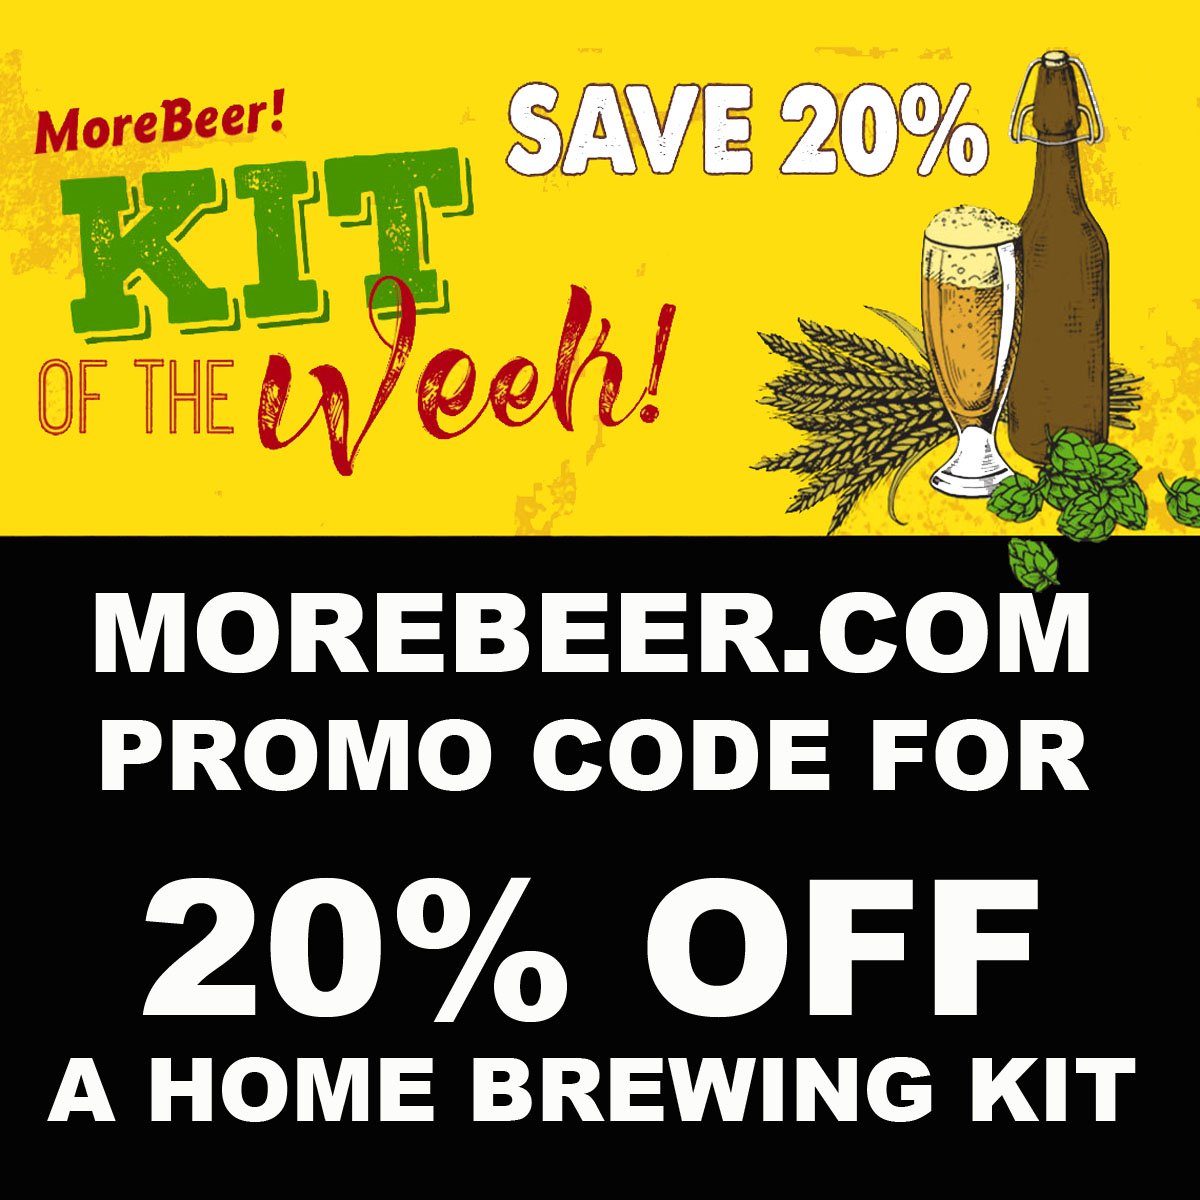 Save 20% On An a 5 Star Extra Special Beer Kit at MoreBeer.com with this More Beer Promo Code